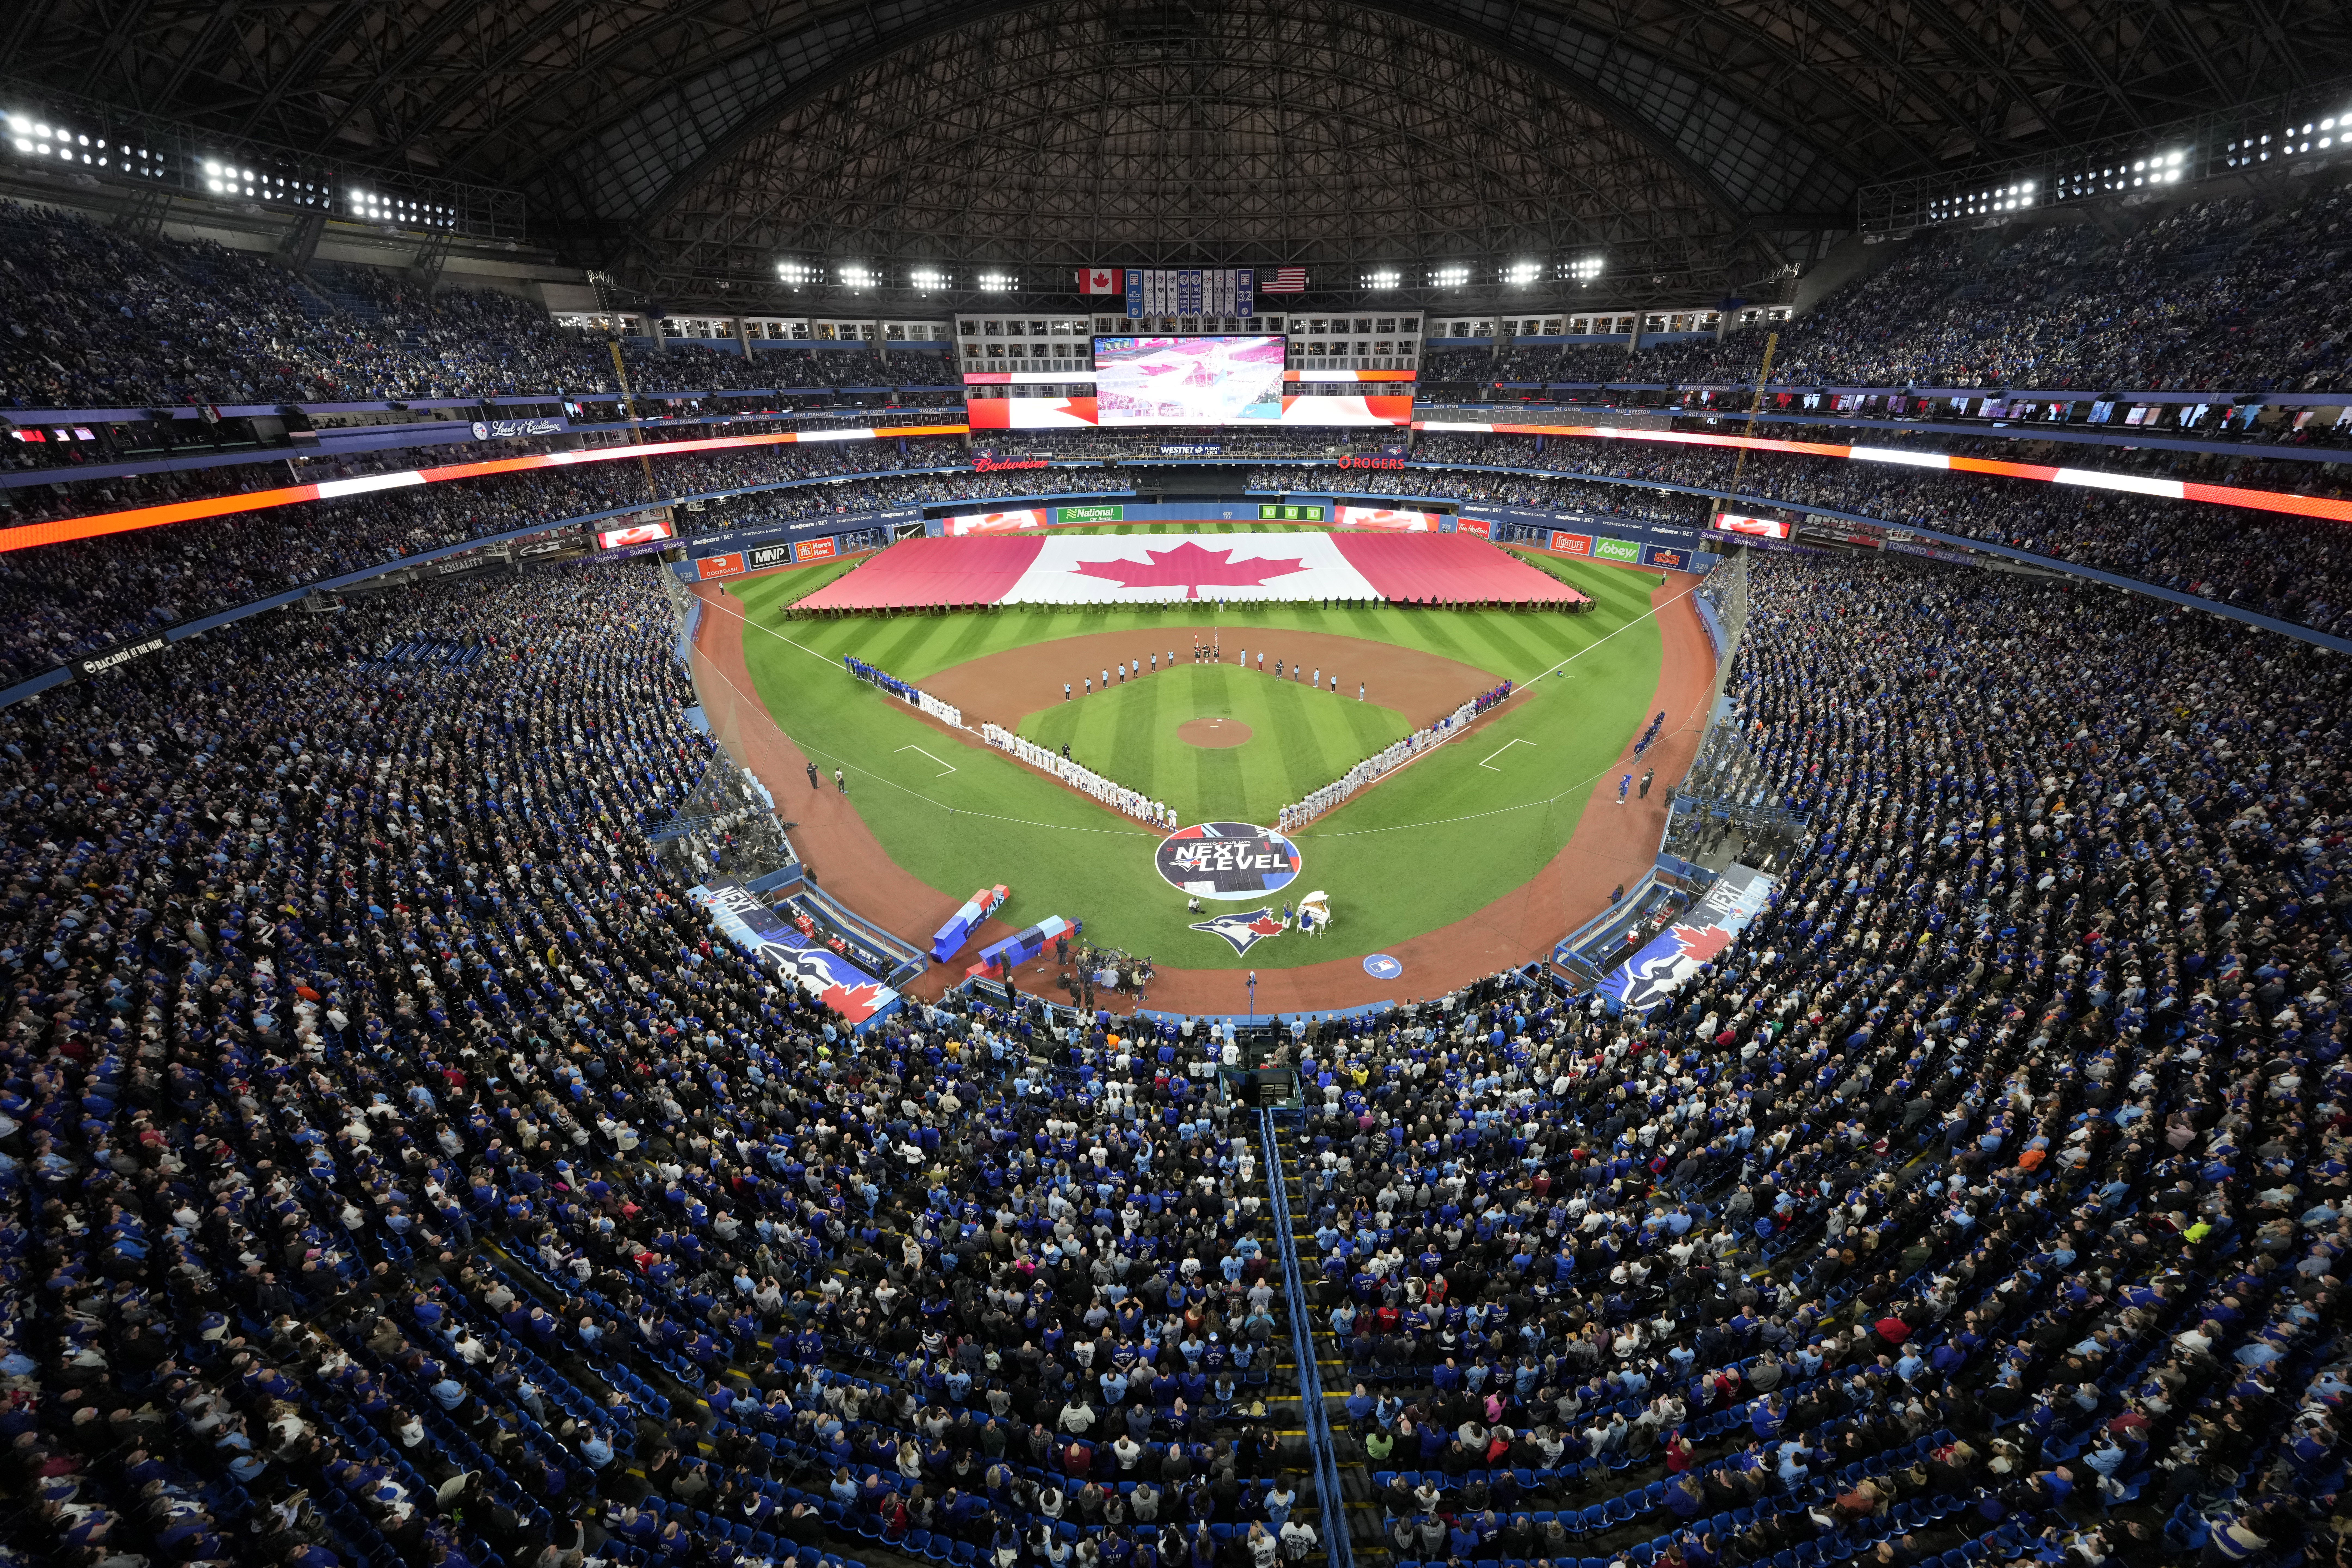 Toronto Blue Jays - We've got the perfect way to spend Saturday, May 2!  Join us at the ballpark for Blue Jays Hello Kitty Day, where a purchase of  a Specialty Ticket